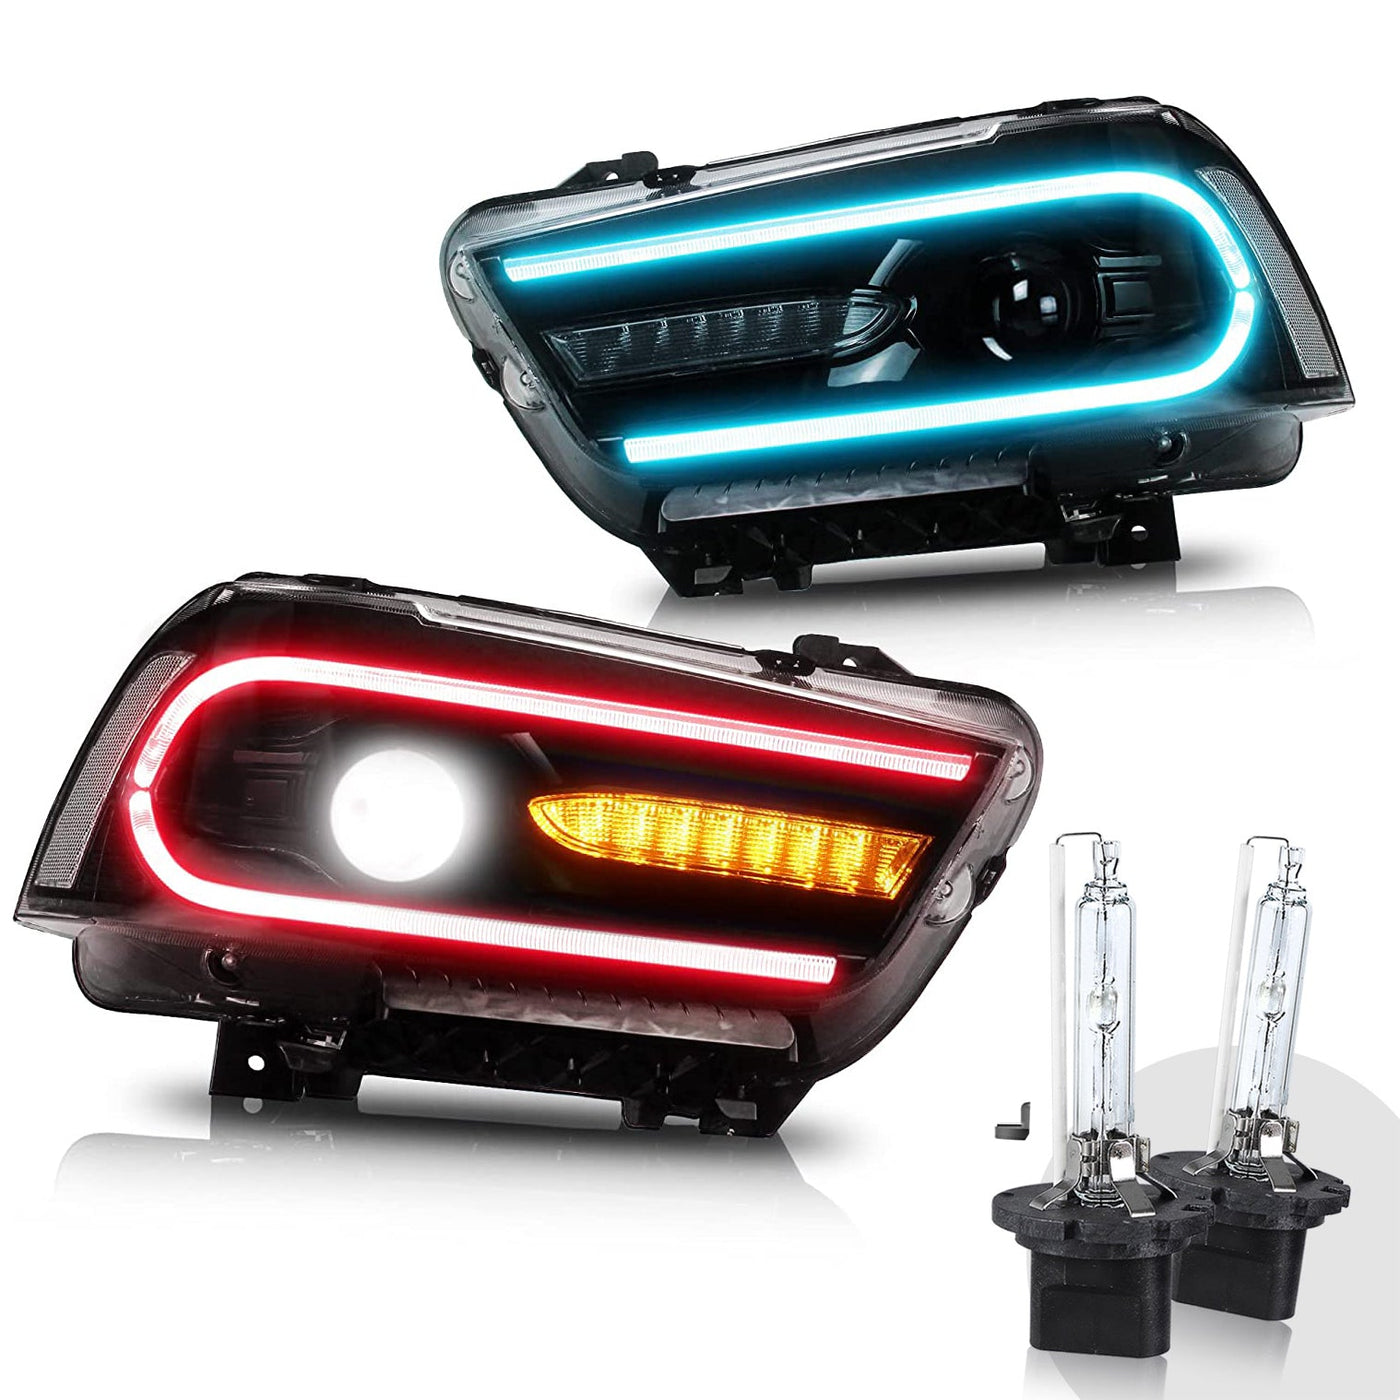 VLAND LED RGB Headlights Multicolor DRL For Dodge Charger 2011-2014 Headlamps Assembly